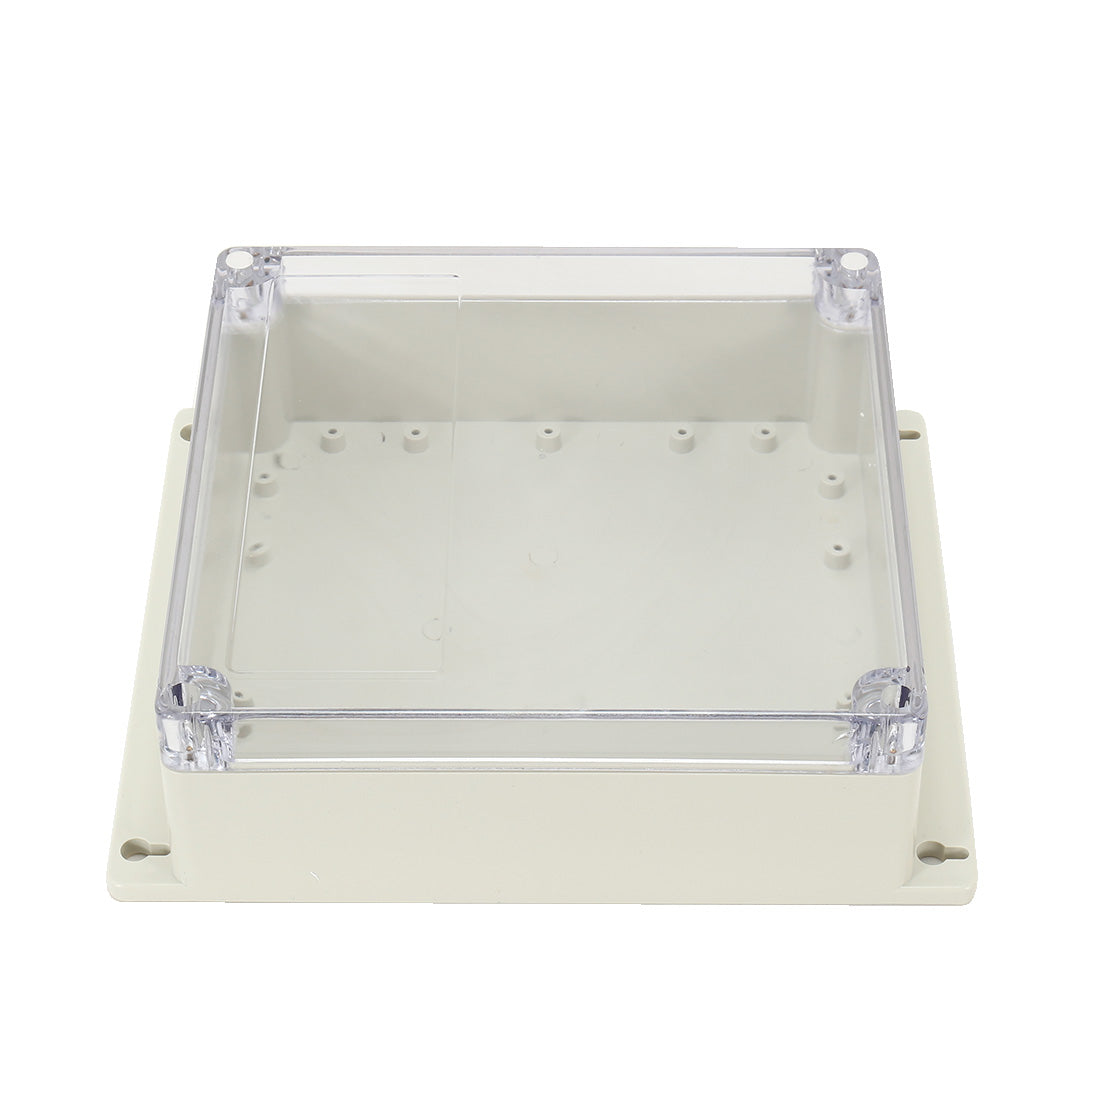 uxcell Uxcell 7.6"x7.4"x2.8"(192mmx188mmx70mm) ABS Junction Box Universal Project Enclosure w PC Transparent Cover